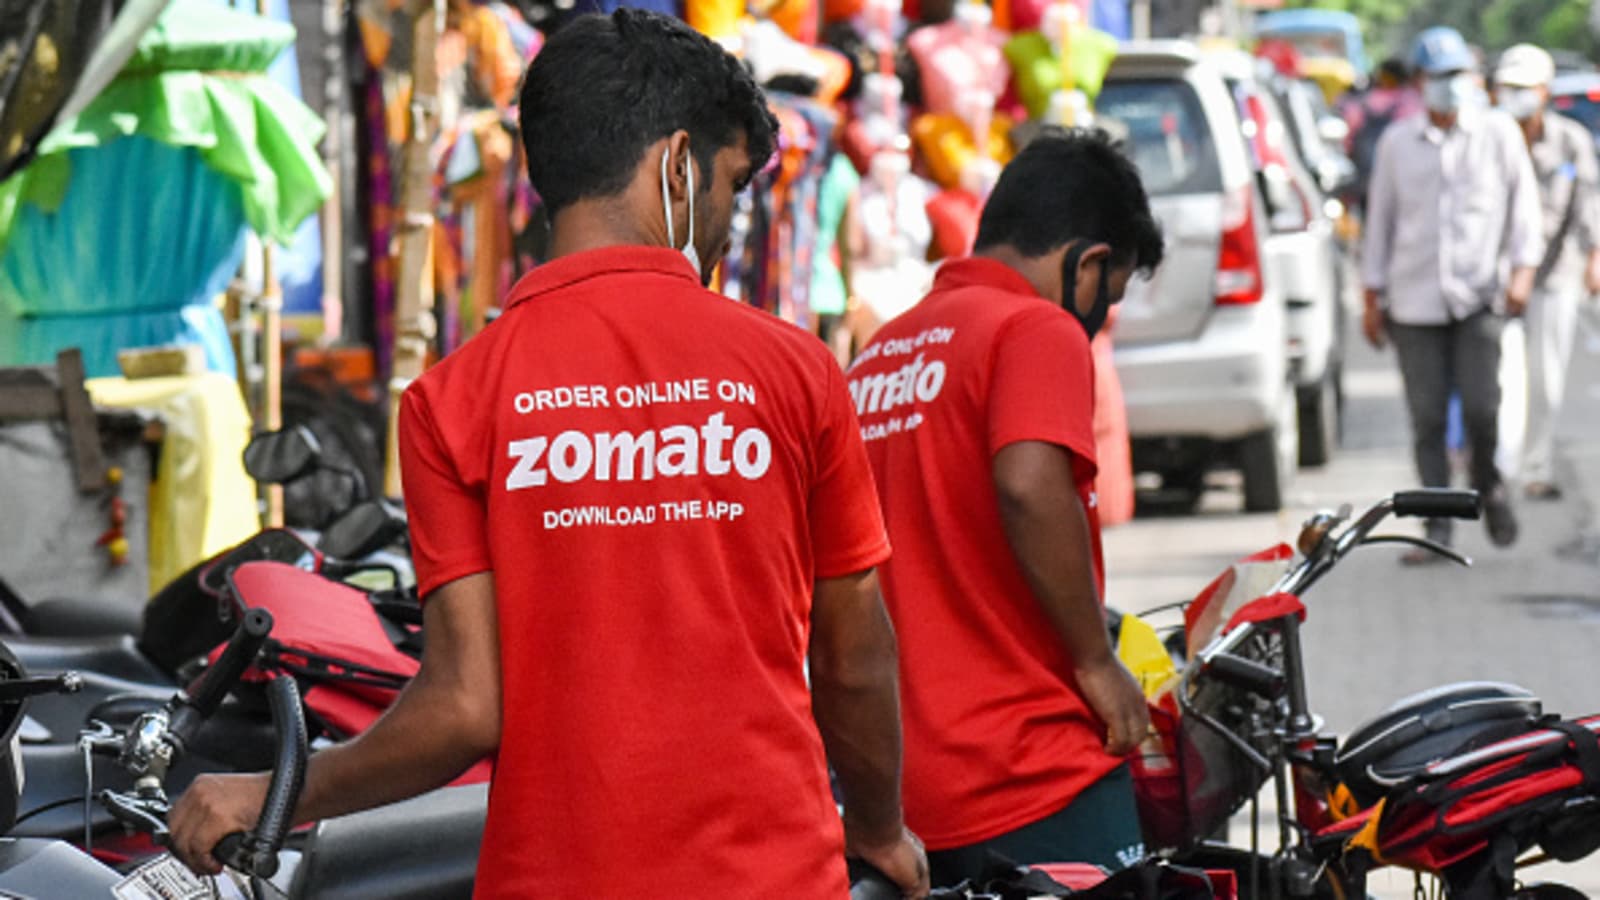 zomato ipo: shares of indian food delivery start-up surge in debut